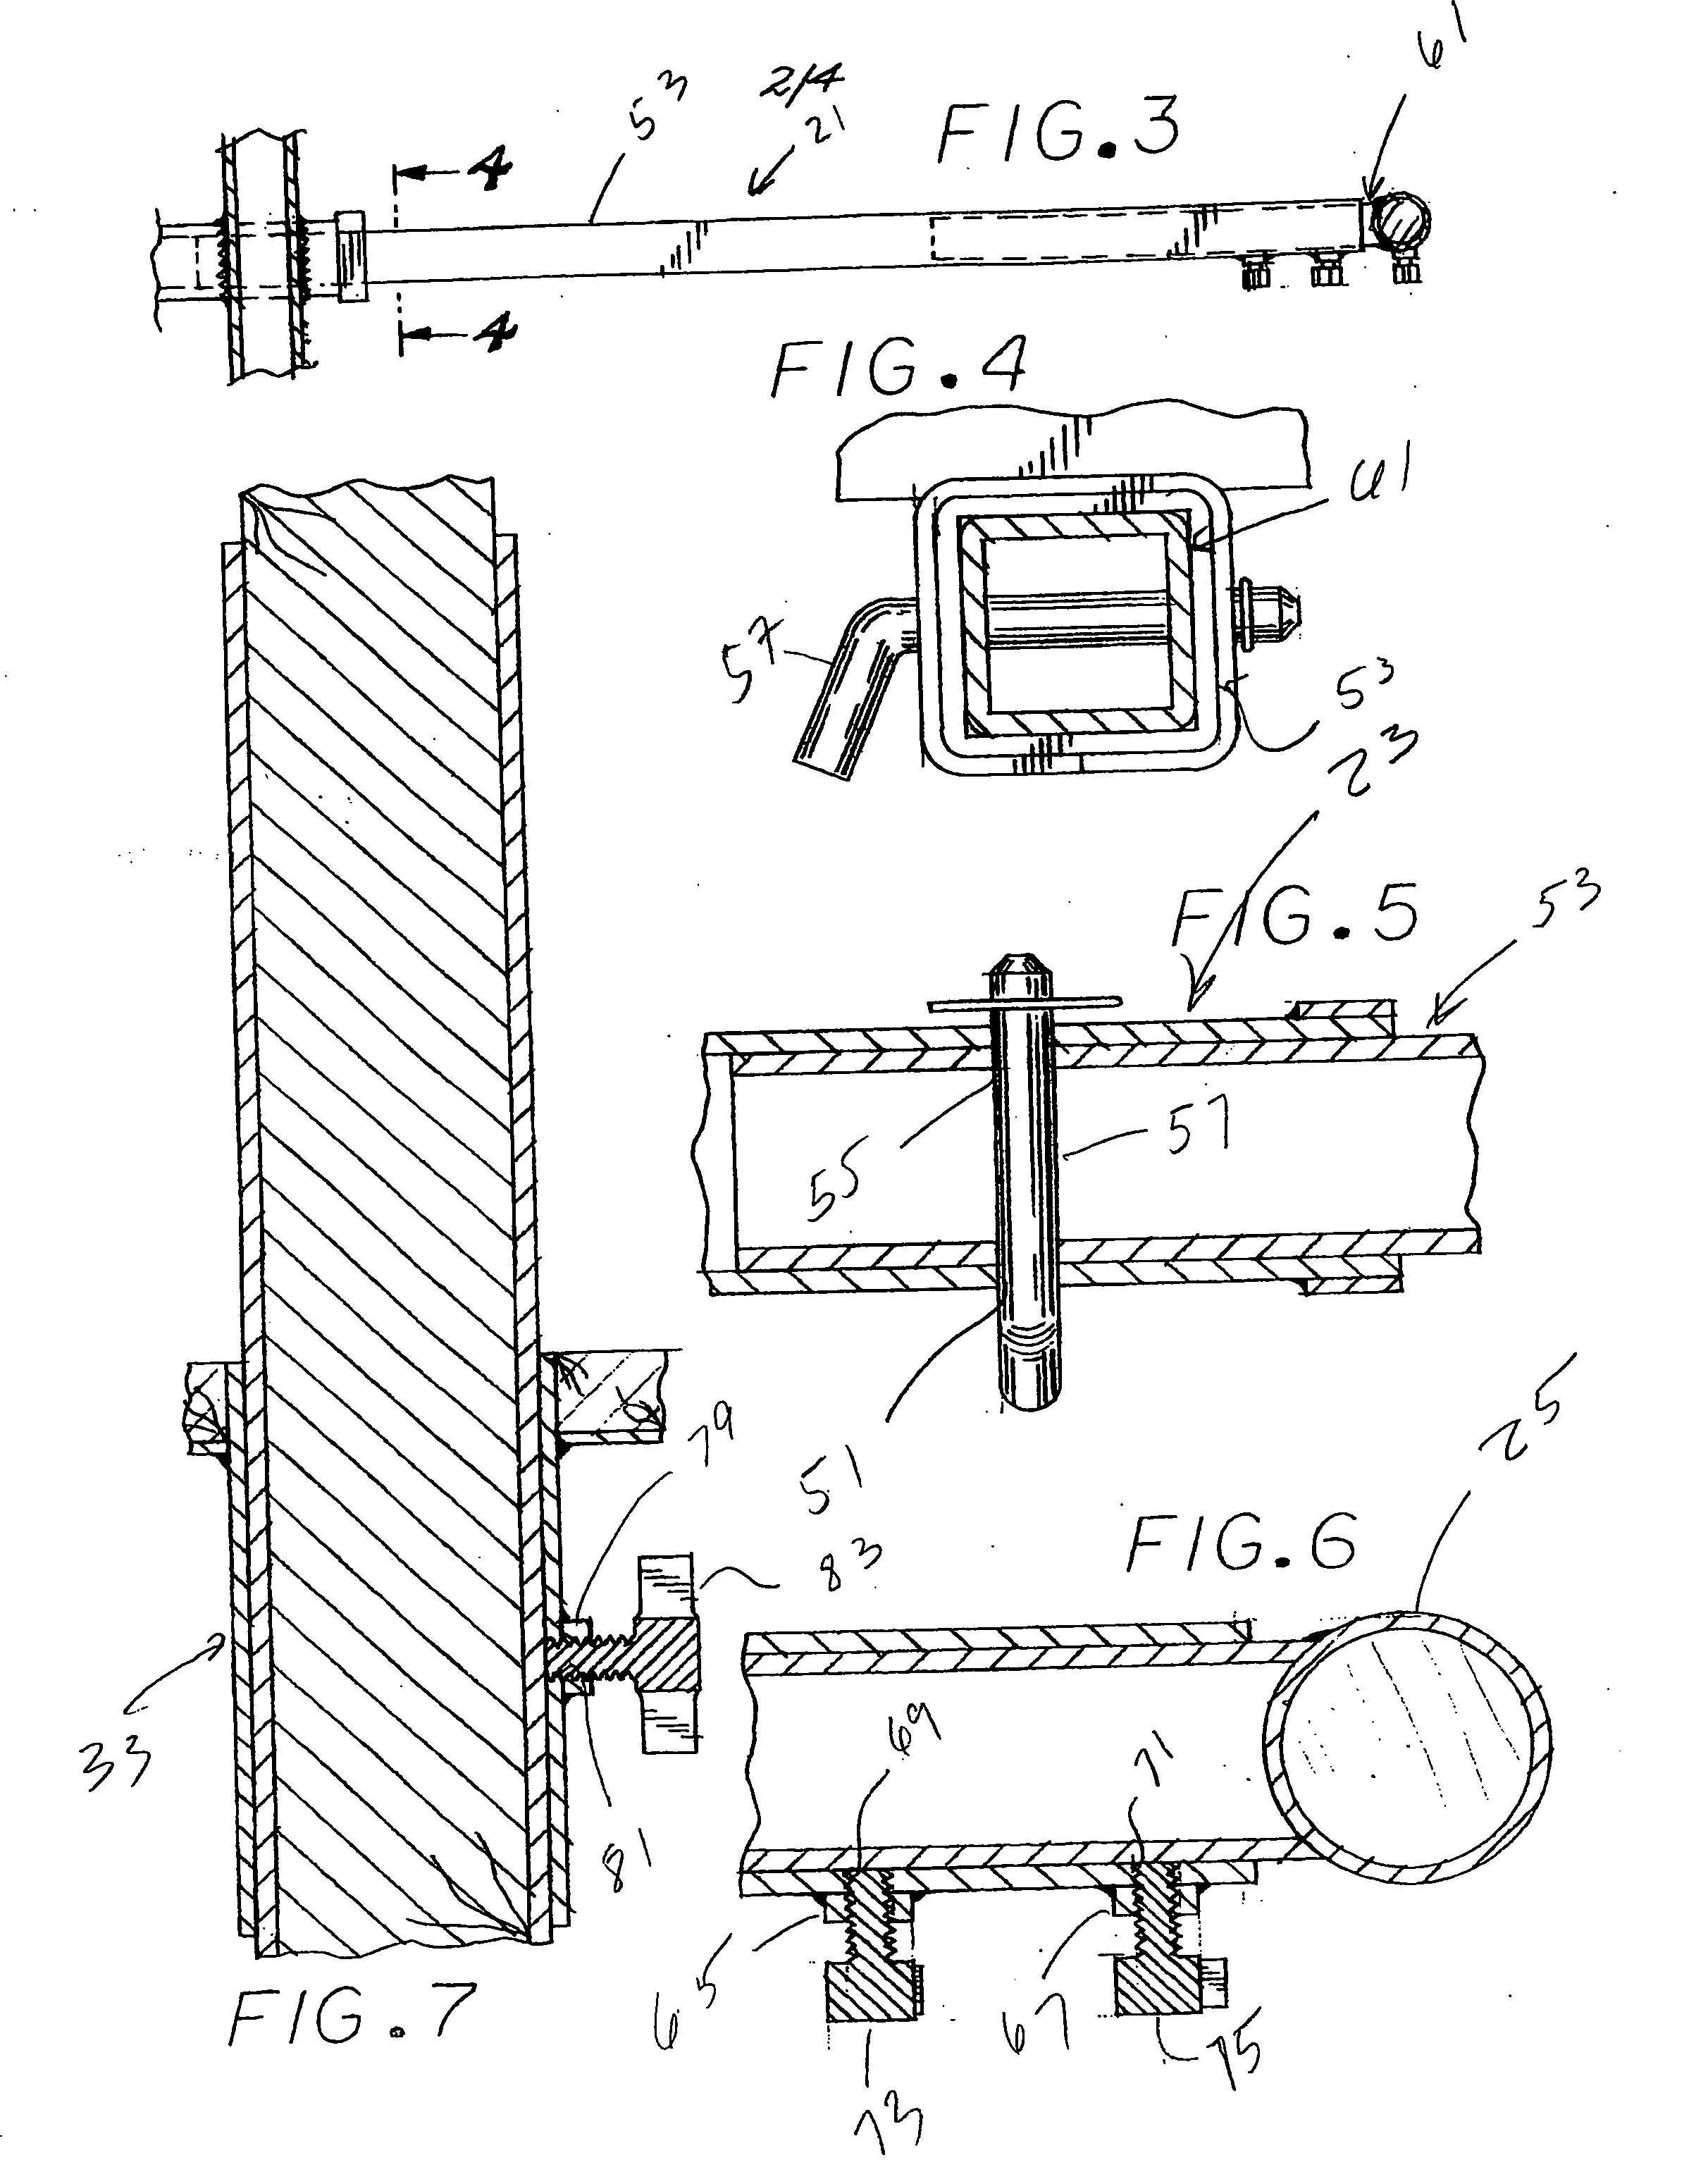 Trailer hitch mounted table and umbrella support apparatus